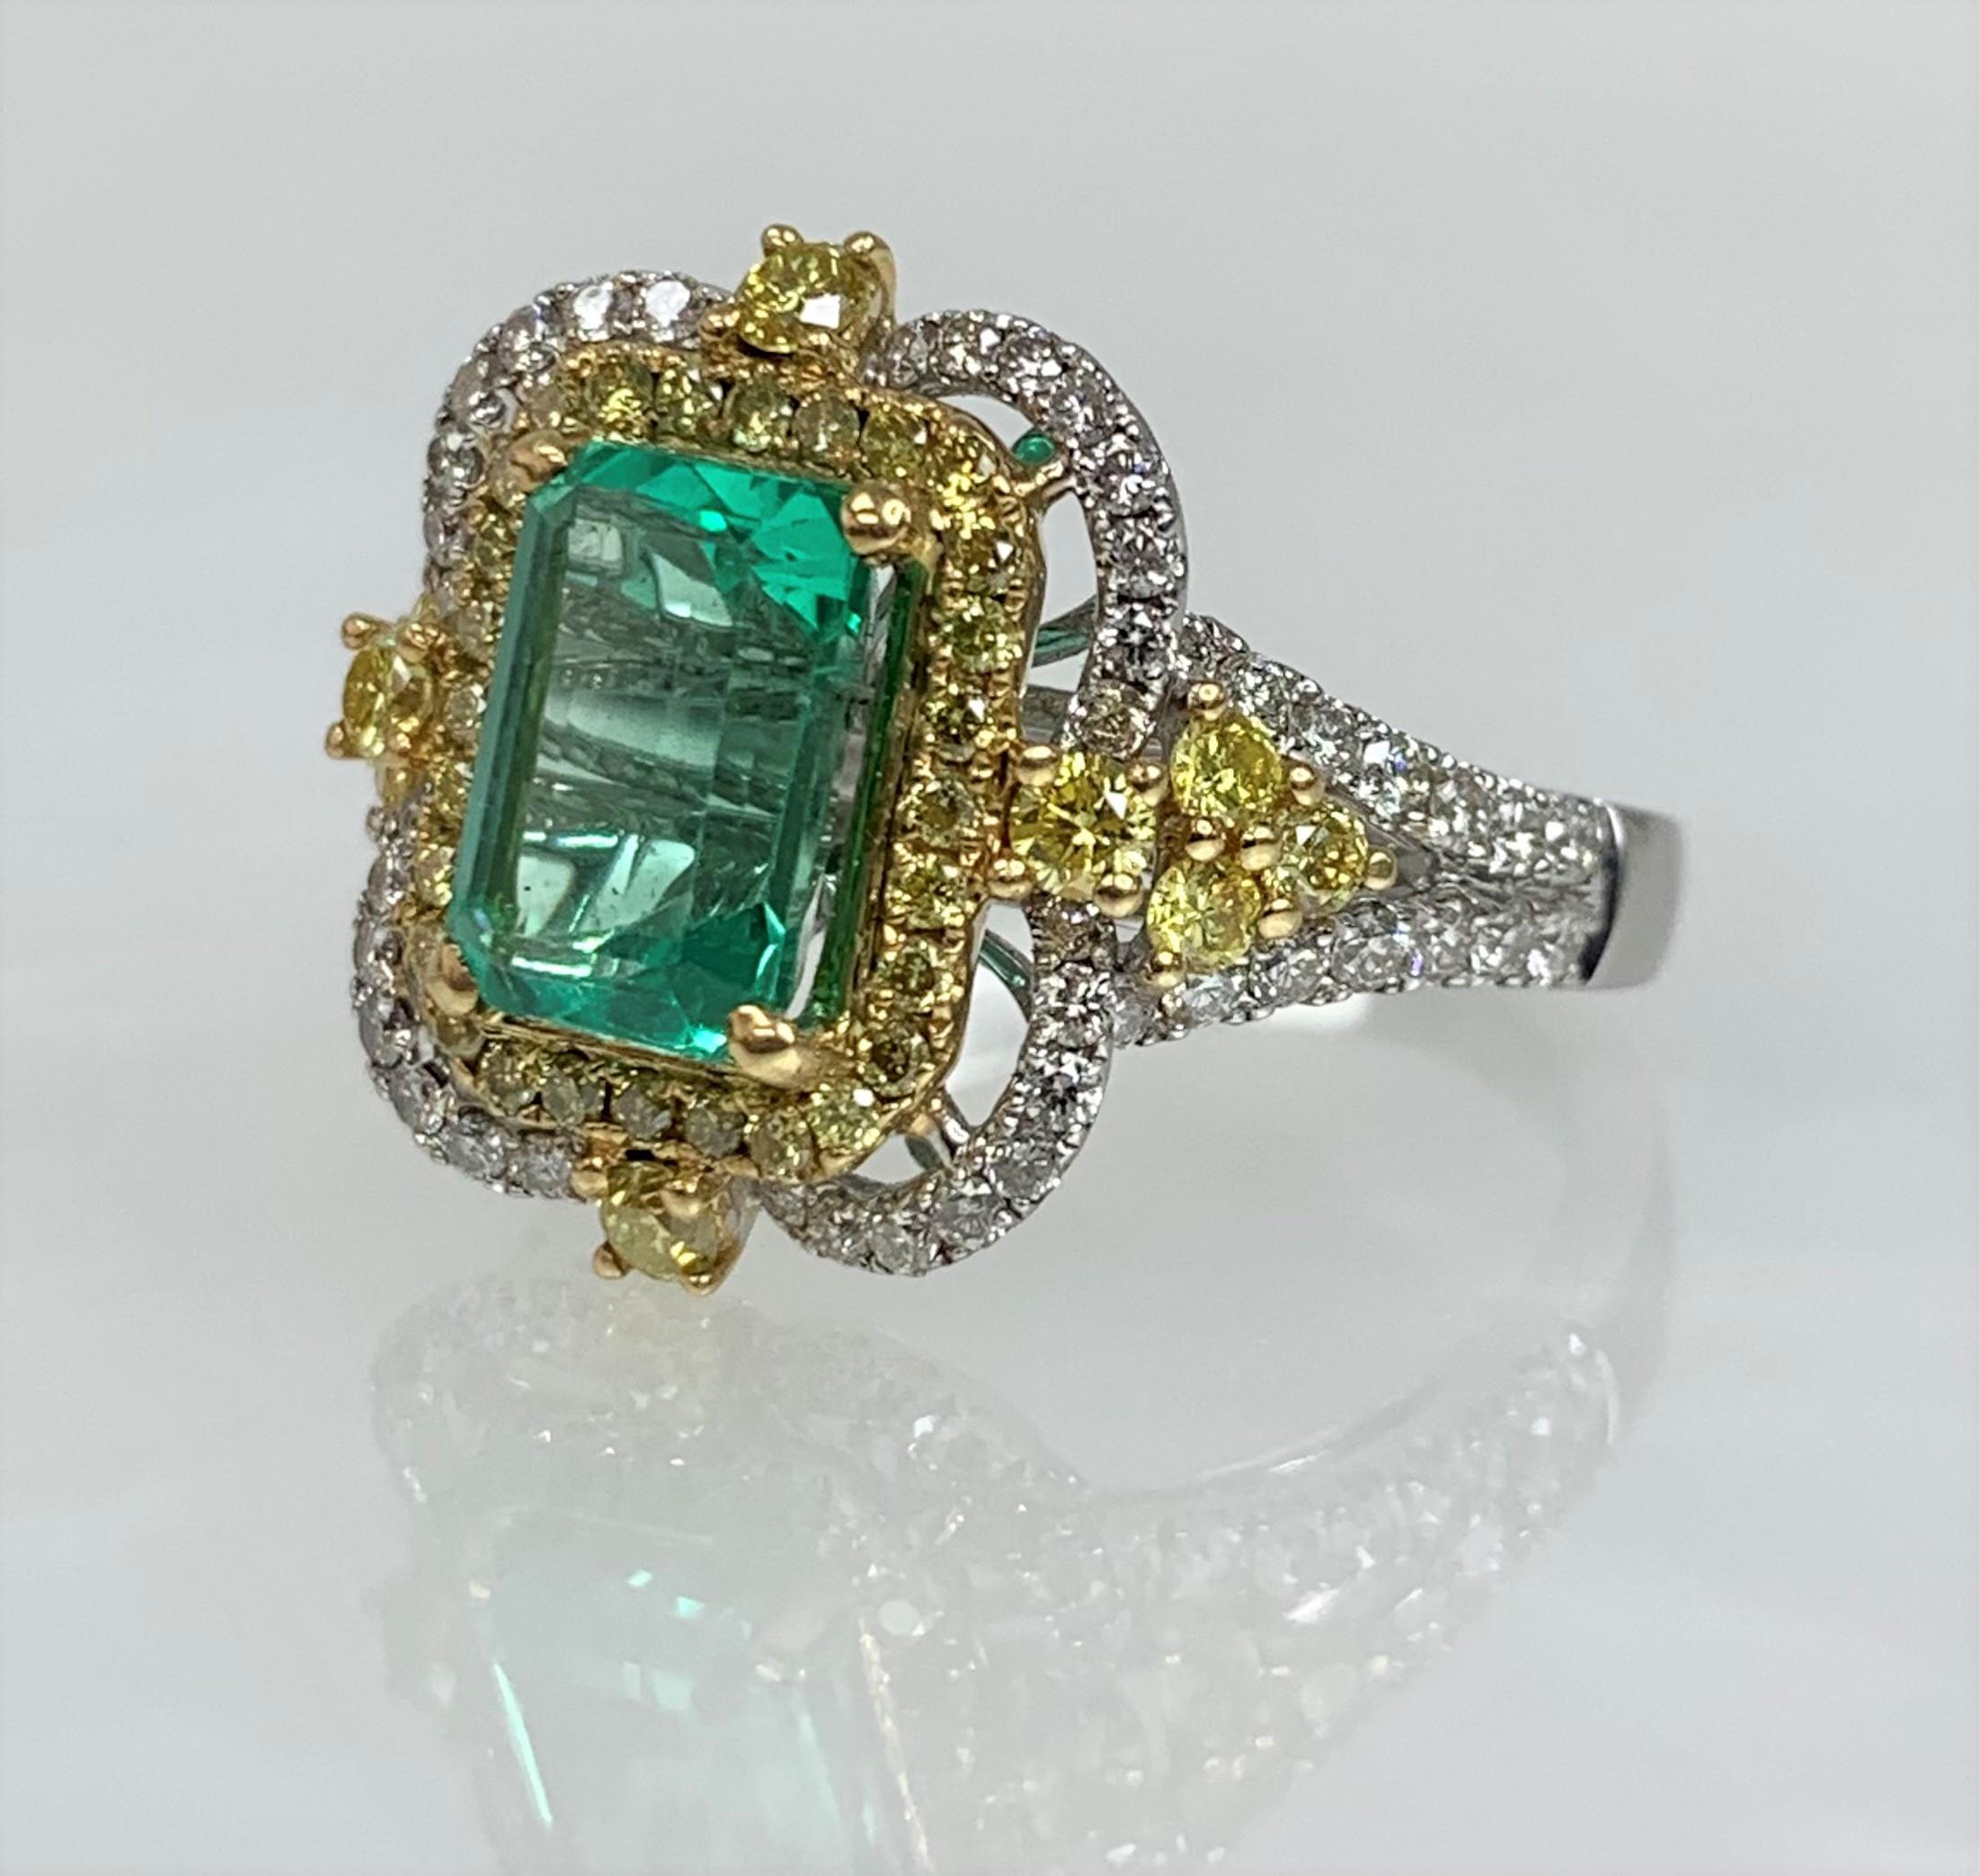 An exquisite and exceptional one- of- a kind colorful ring featuring an bright emerald cut emerald weighing 1.68 carats accented by 0.53 carats of yellow diamonds and 0.58 carats of white diamonds.

*Approximate stone measurements:
Height: